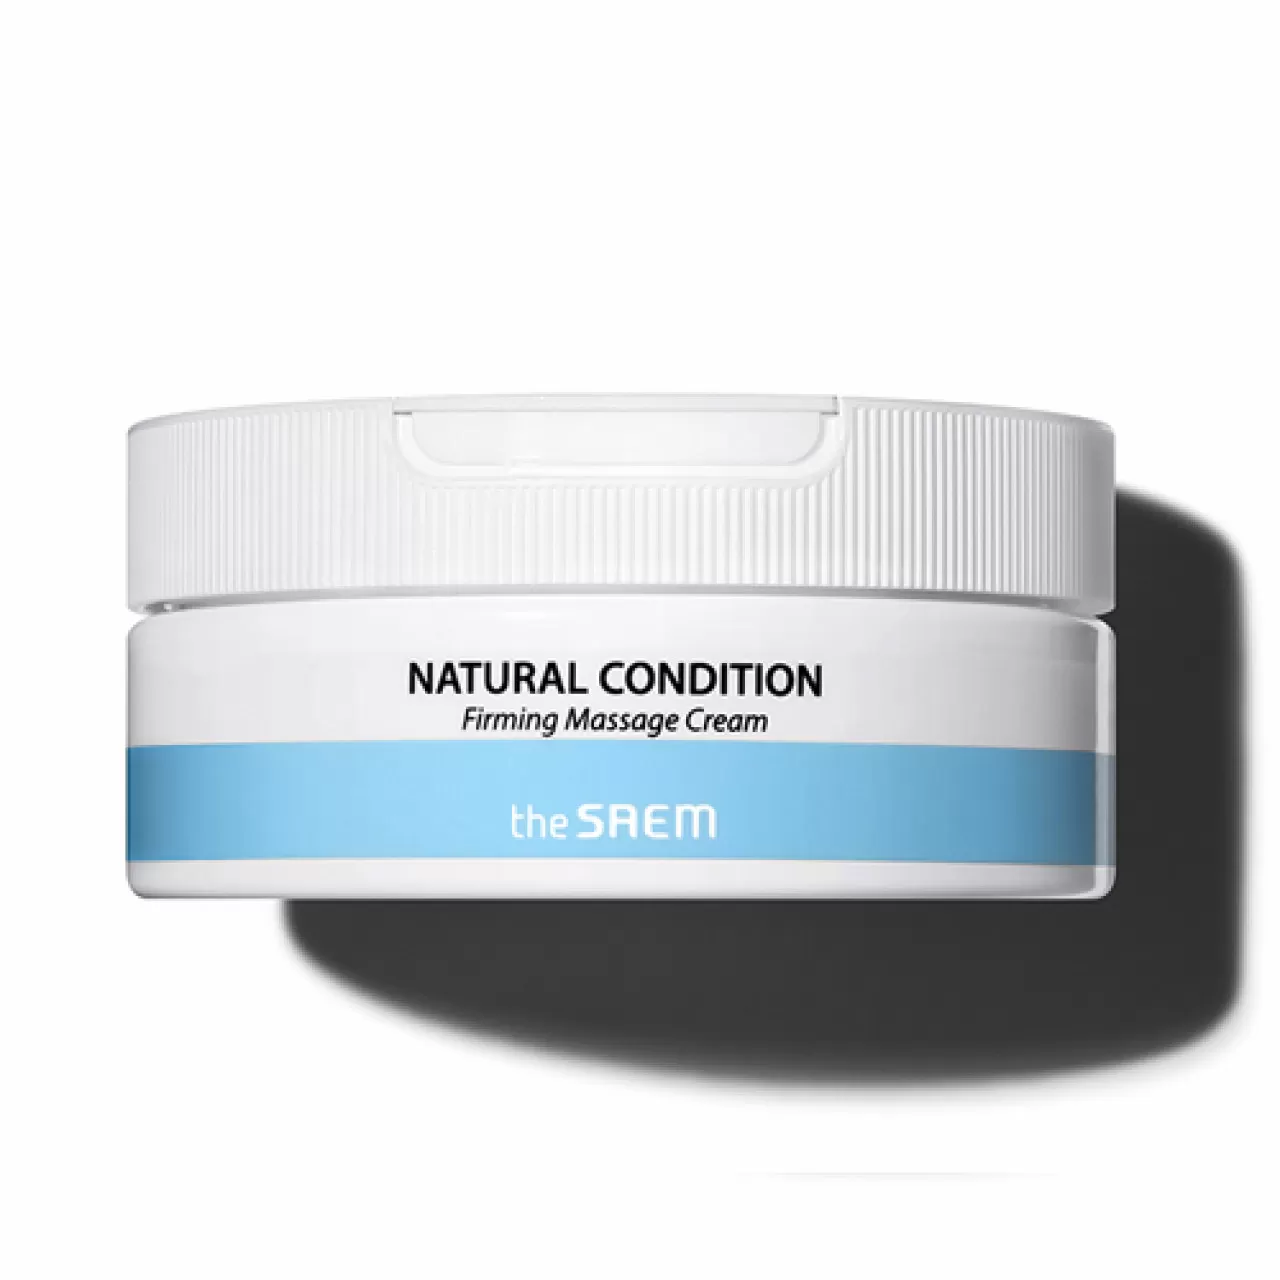 Natural condition. [THESAEM] natural condition Firming massage Cream - 200ml. The Saem массажный крем. Крем natural condition для лица массажа. См natural condition крем natural condition Firming massage Cream.